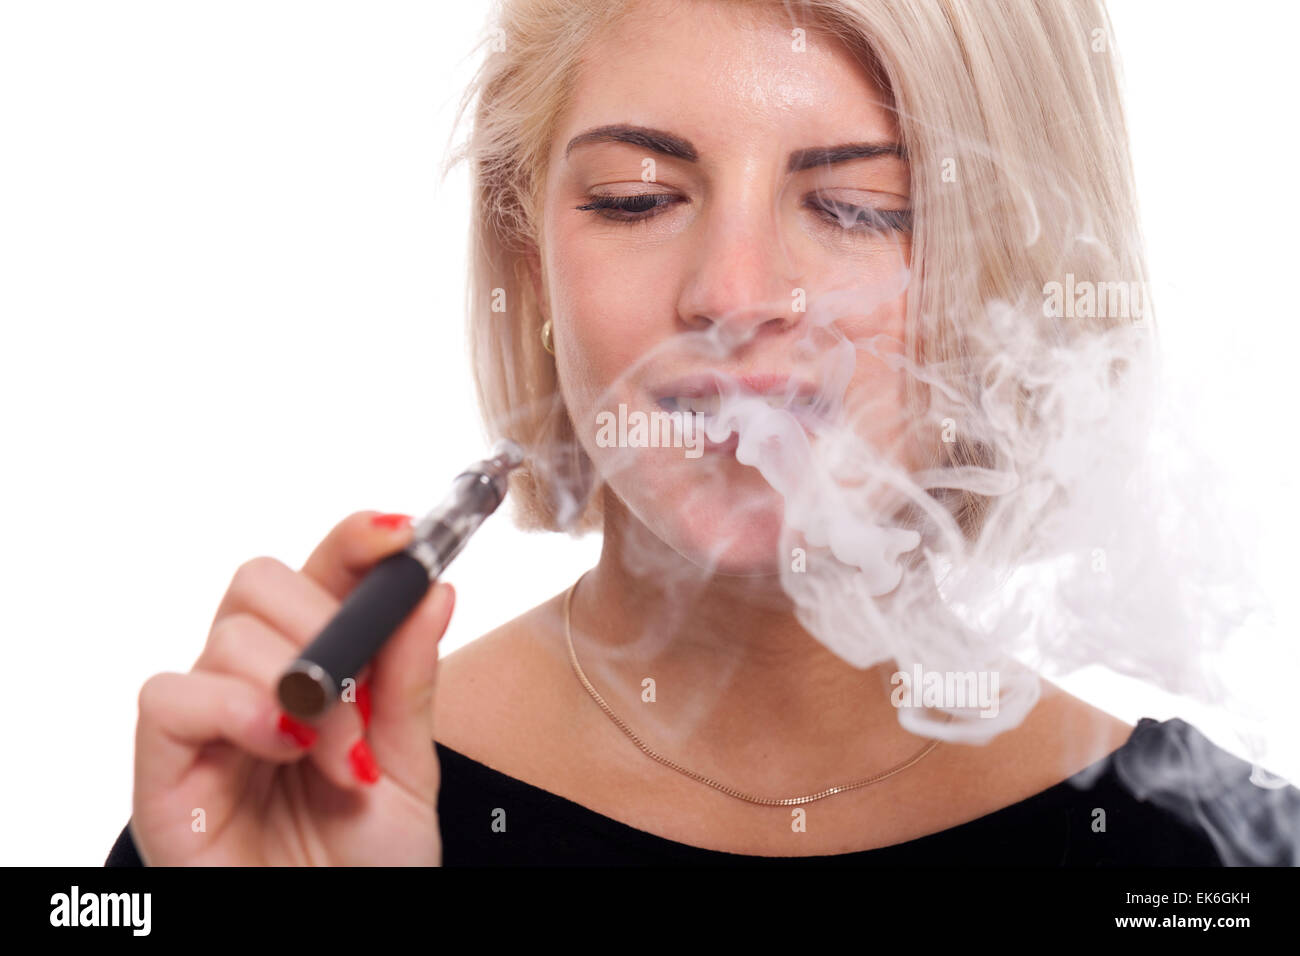 Close up Serious Facial Expression of a Young Blond Woman Smoking Using E- Cigarette on a White Background Stock Photo